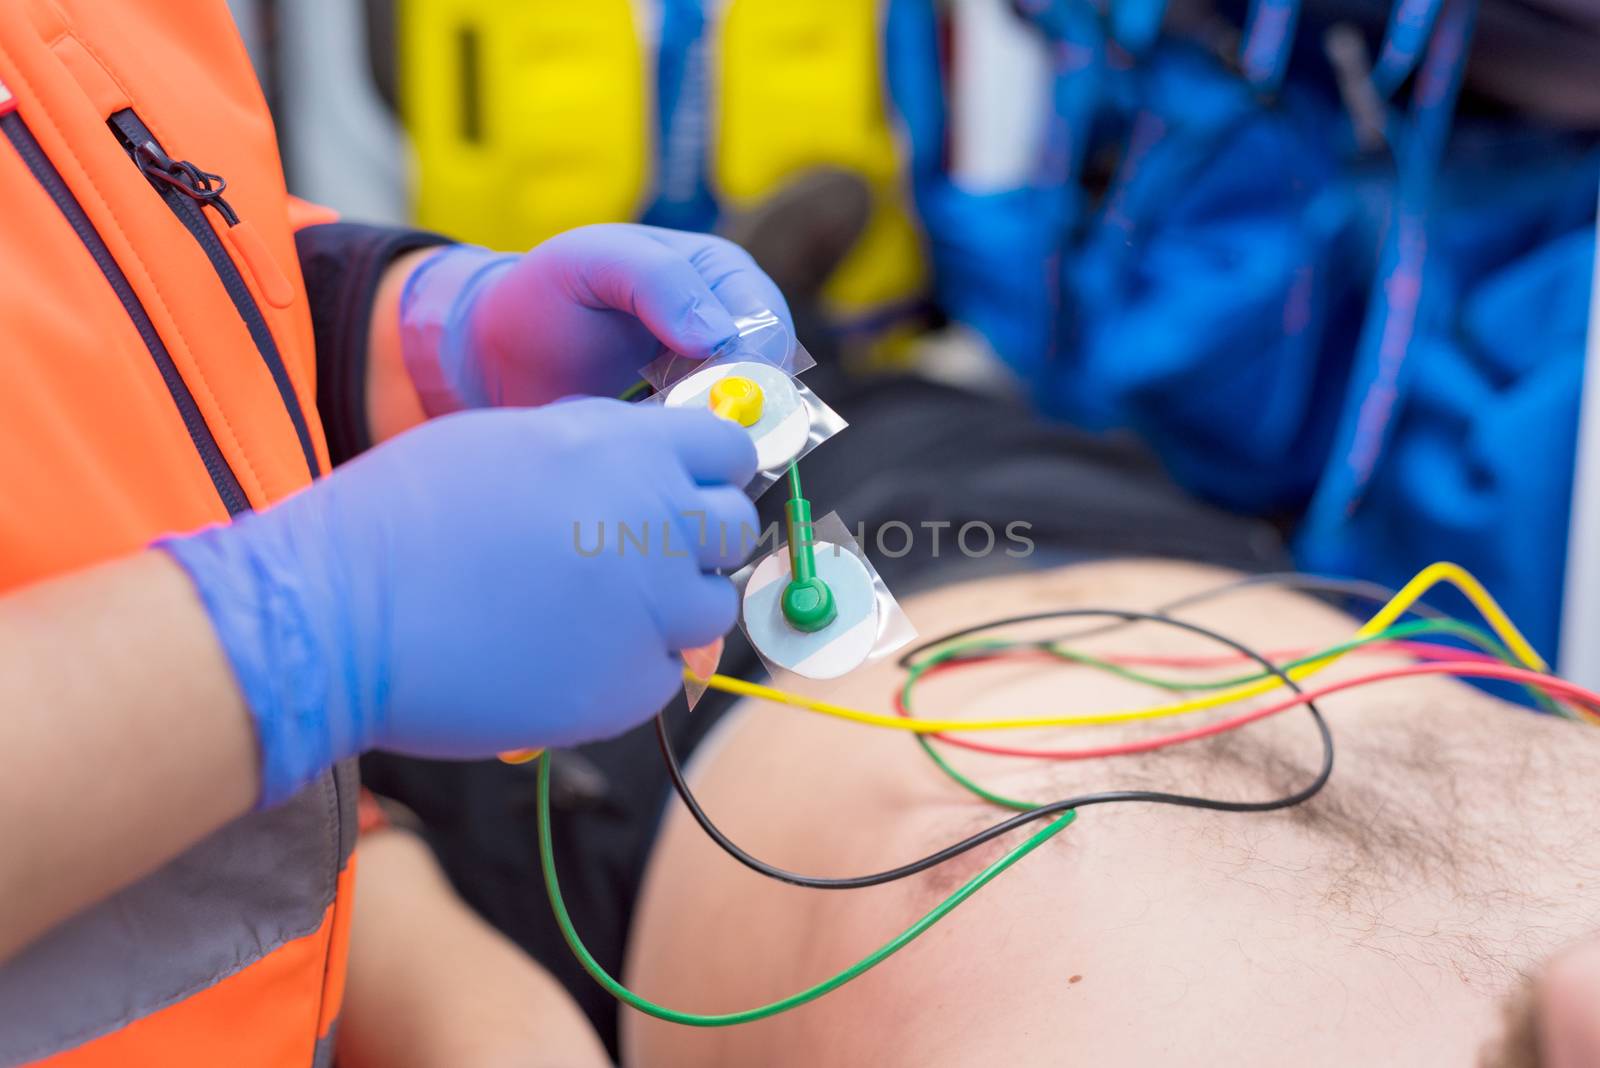 Emergency doctor hands, attaching ecg electrodes on patient chest in ambulance by HERRAEZ